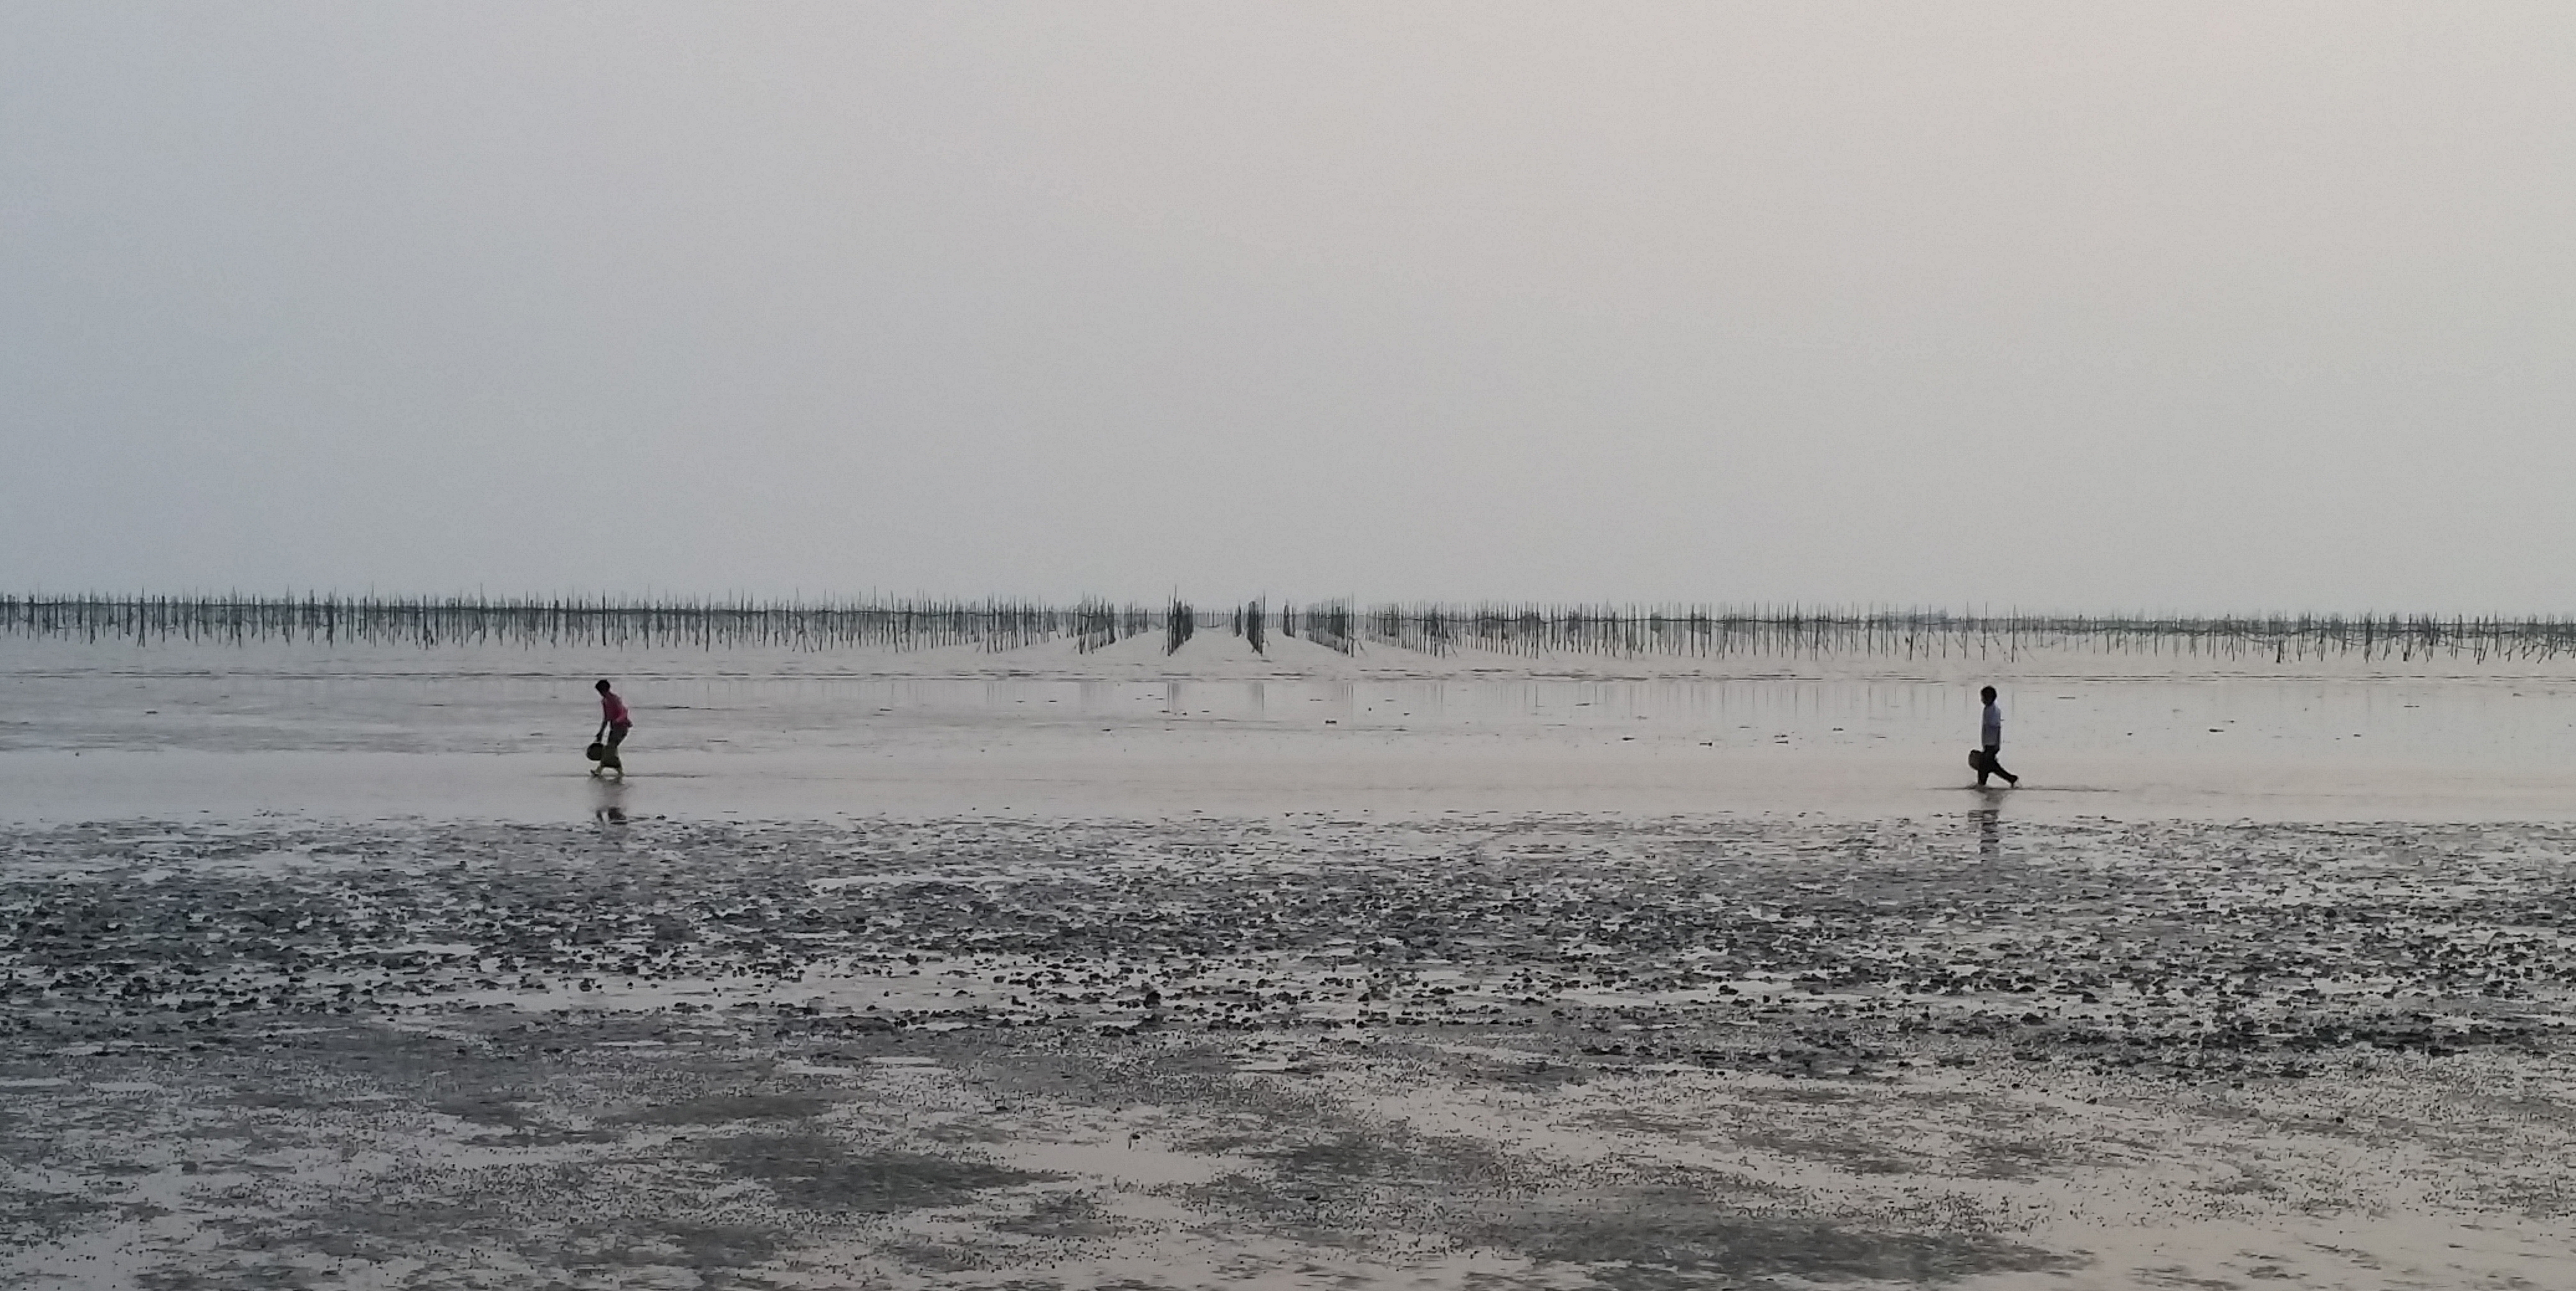 [Accepted] Mud flat and fishermen1